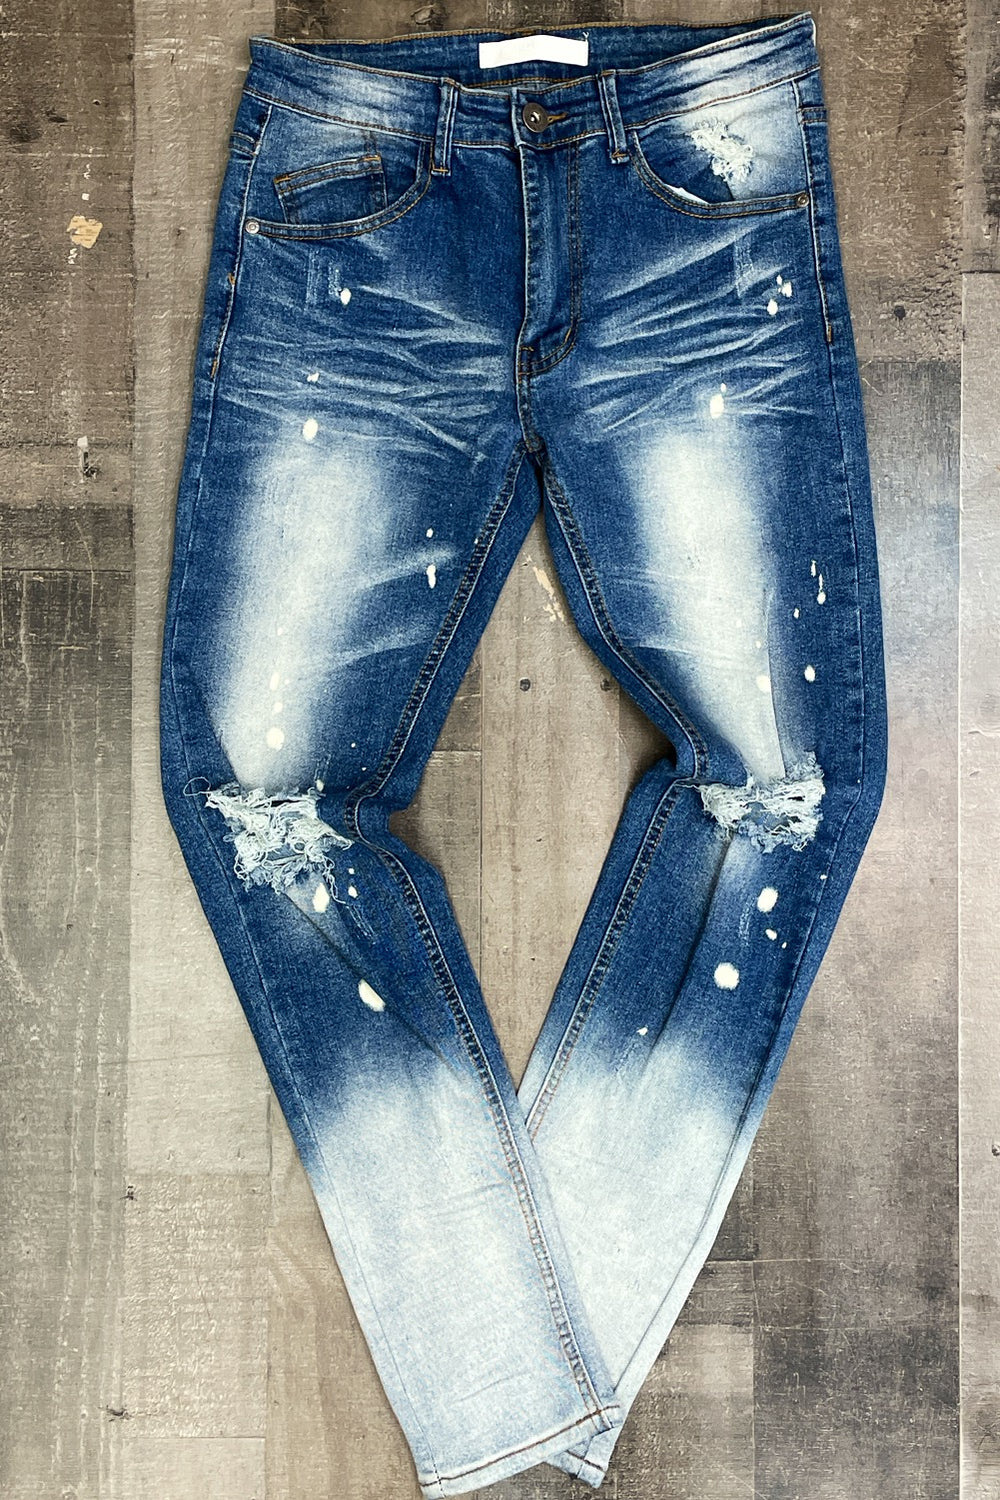 KDNK- ombre bleached jeans